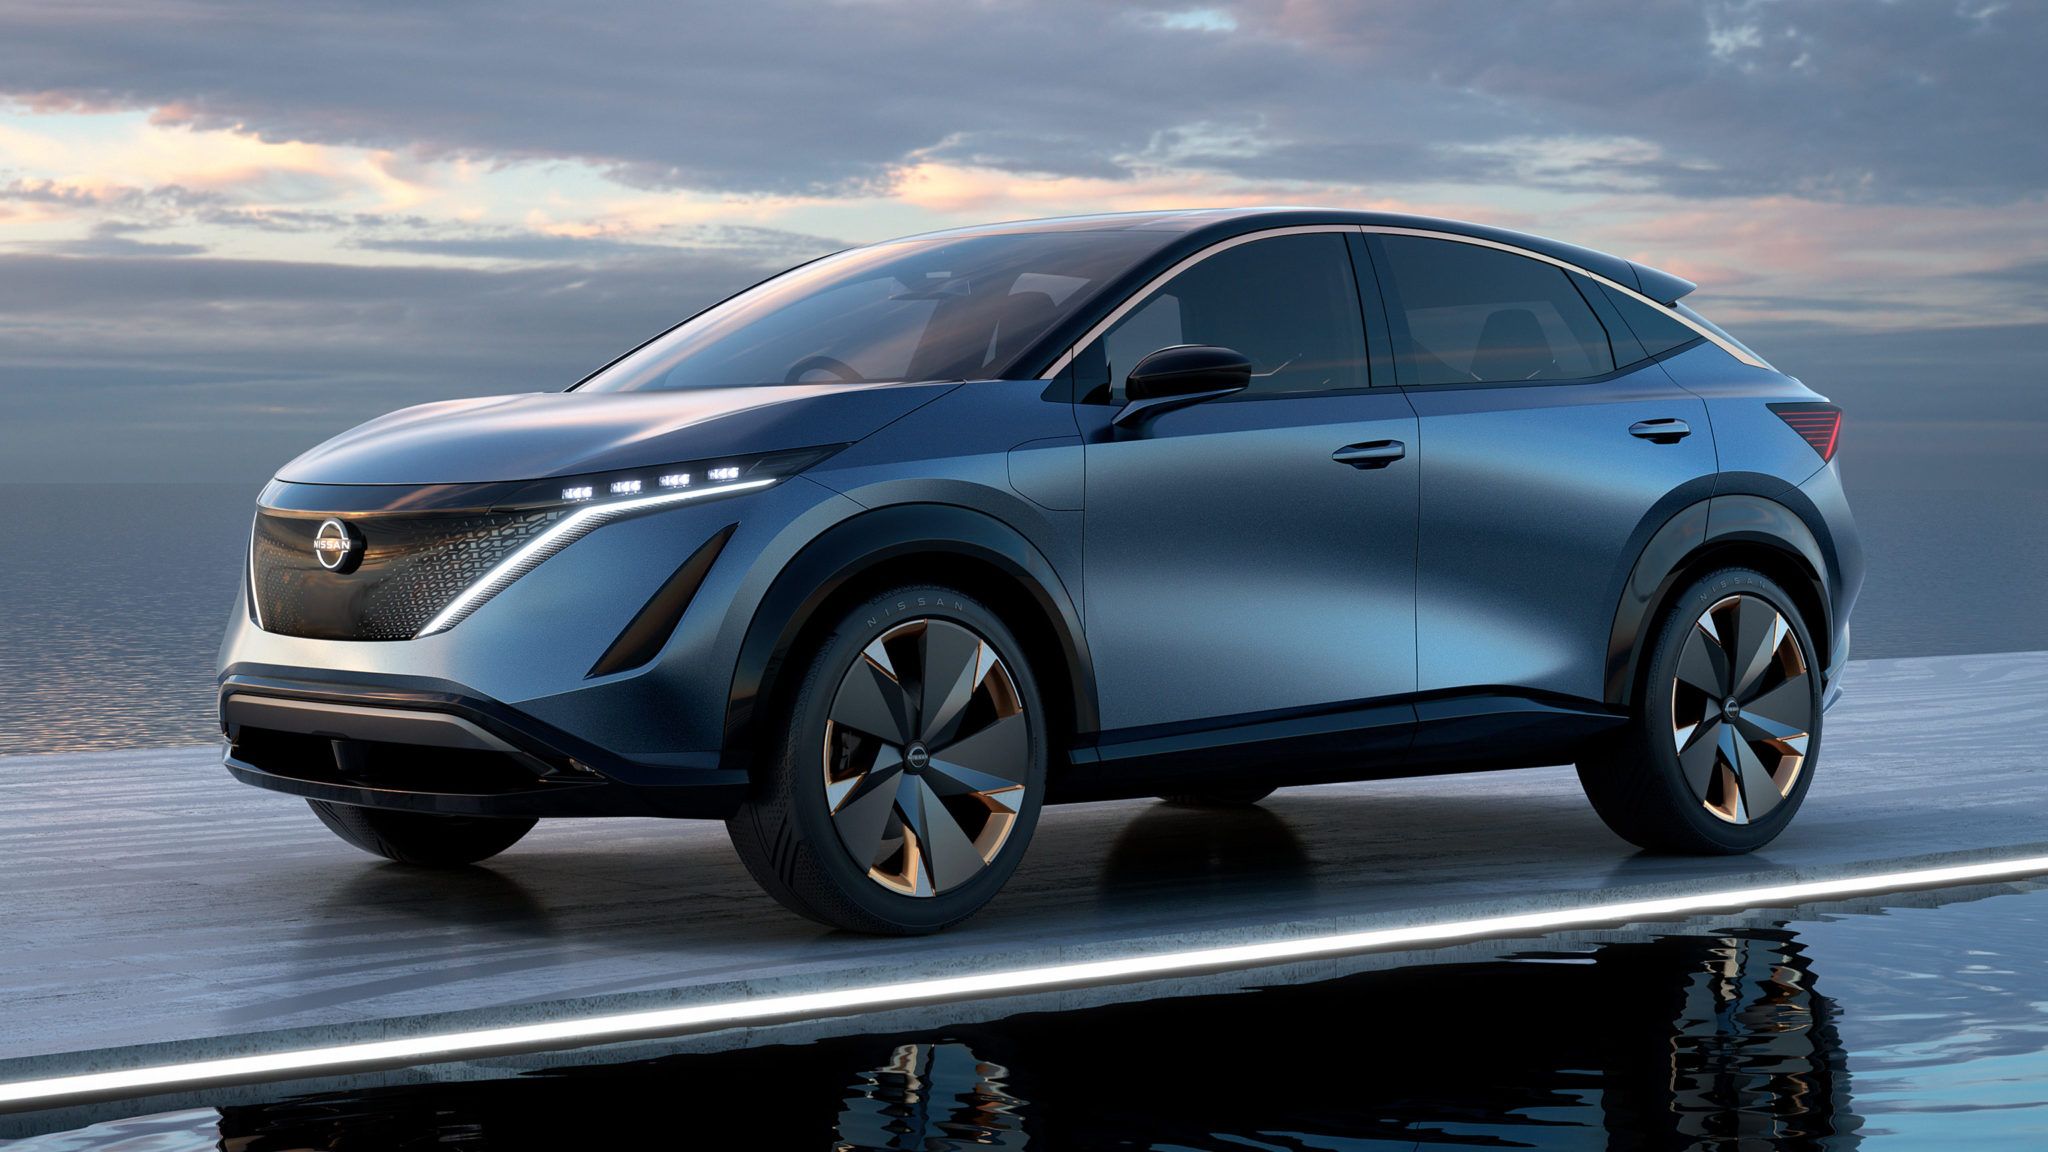 2022 Nissan Ariya, the EV SUV we have been waiting for?